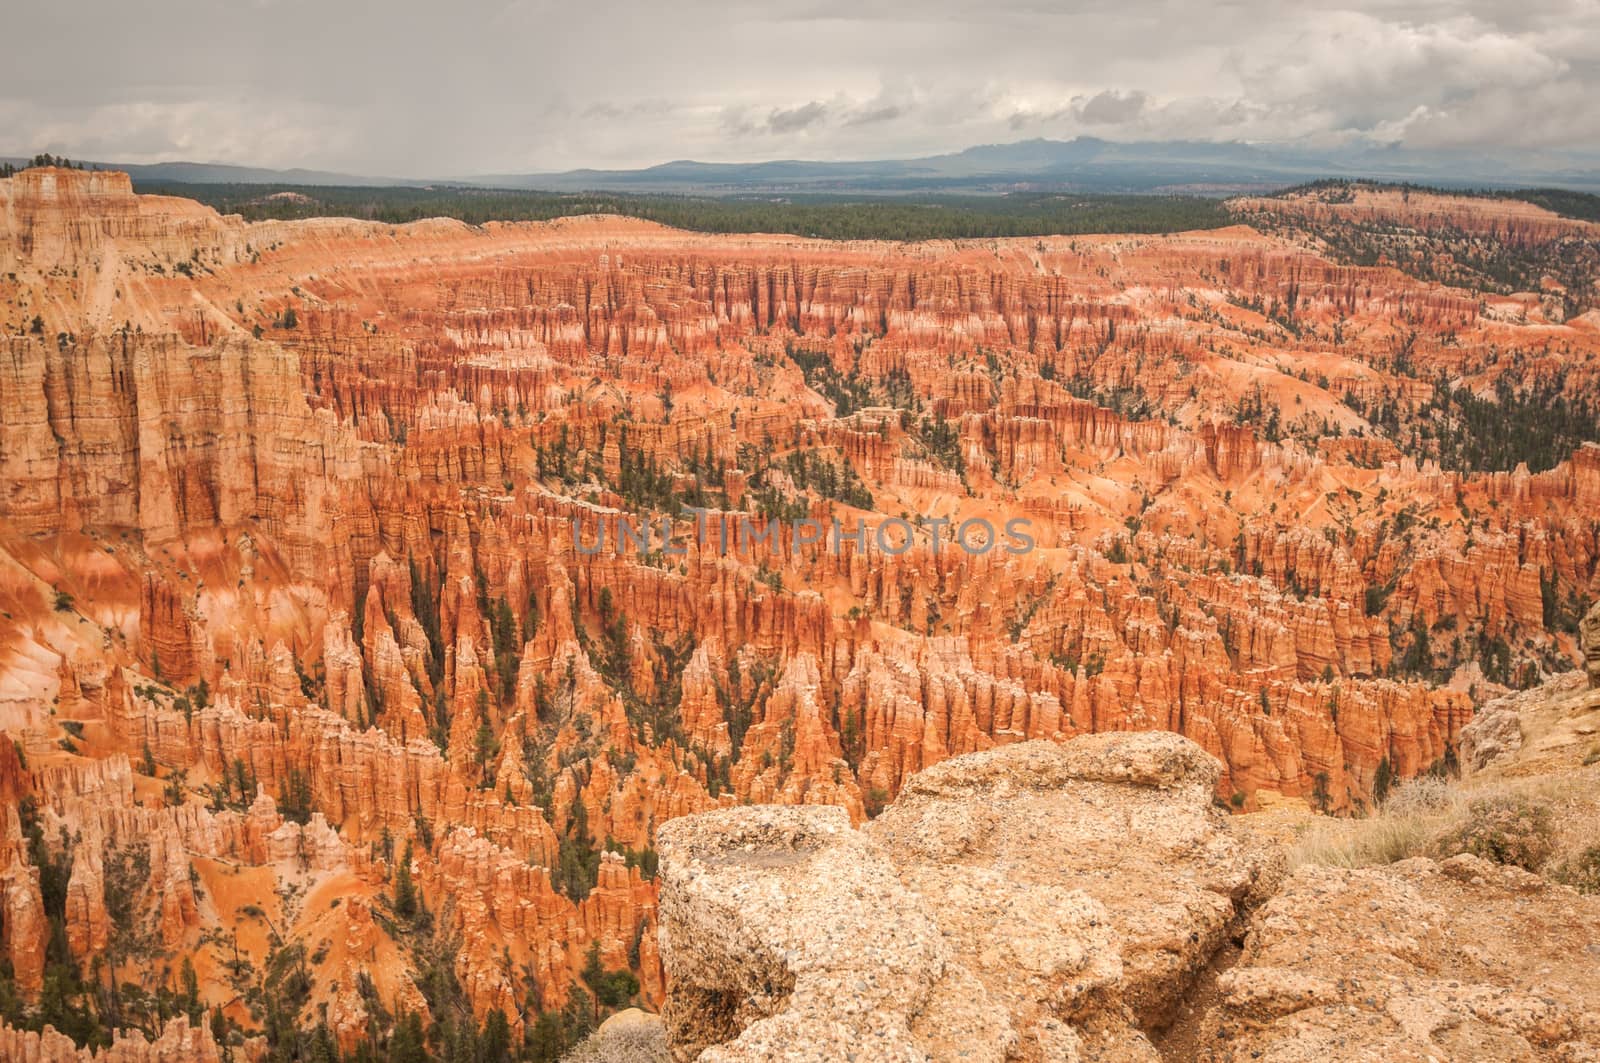 Bryce valley Canyon amphitheater west USA utah 2013